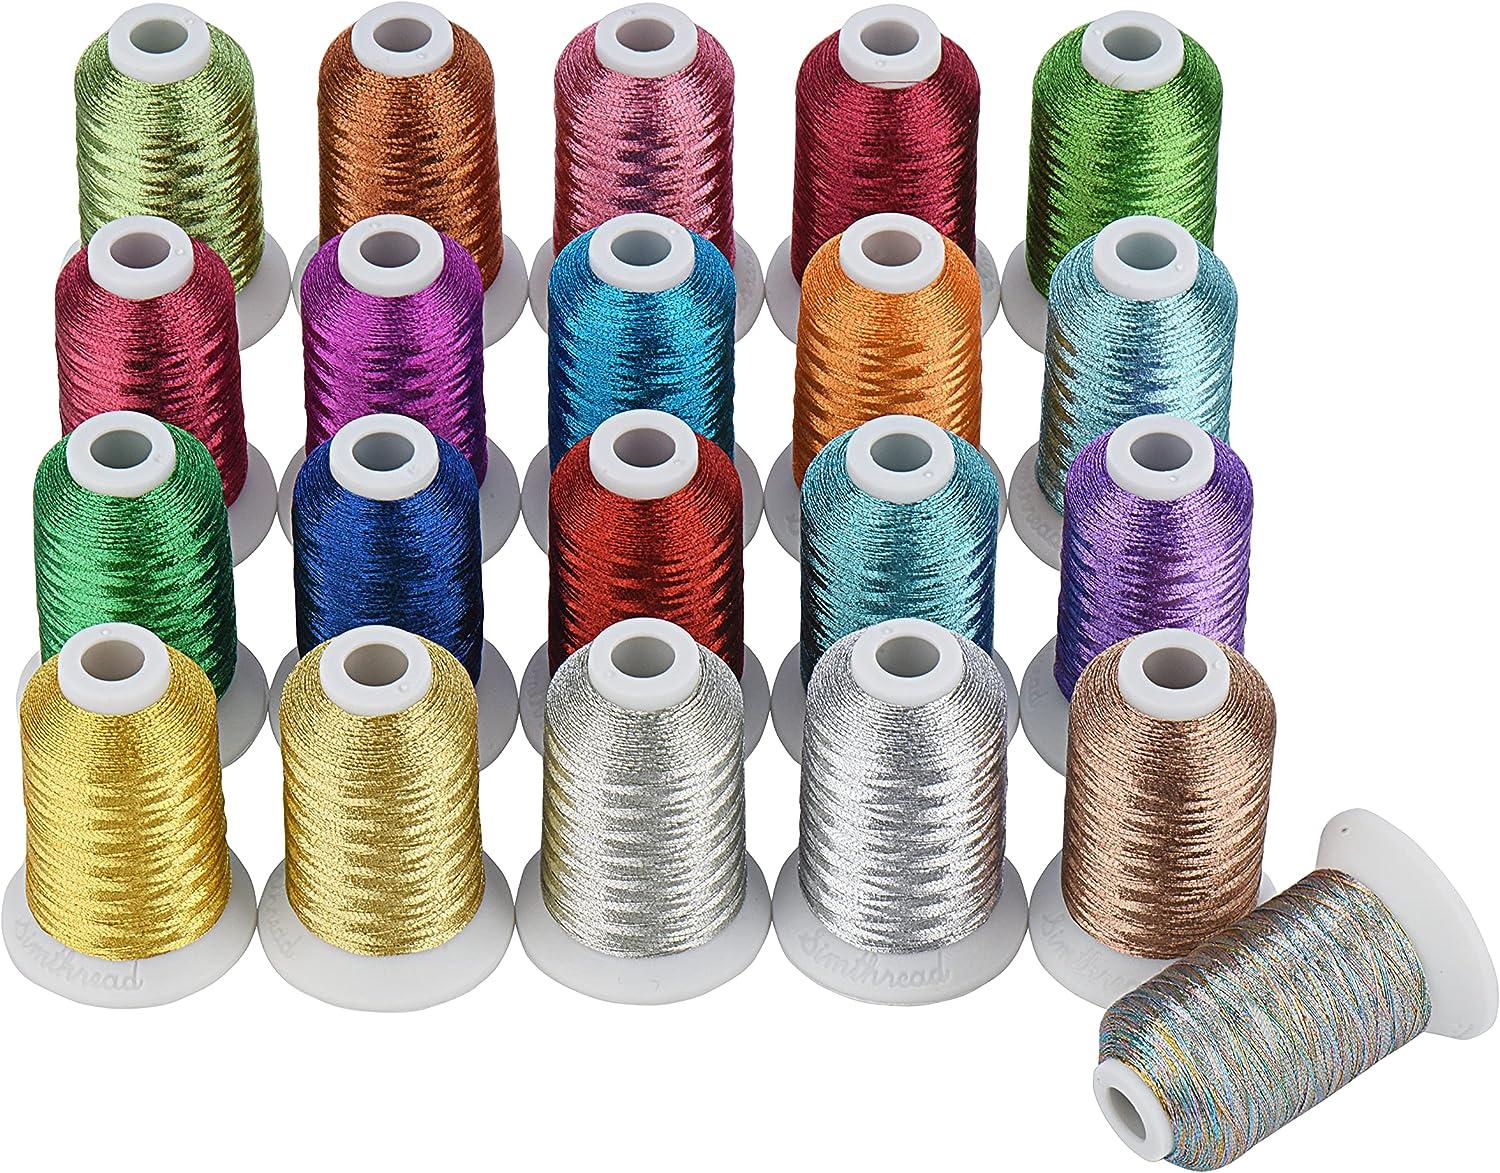  12 Colors Glow in The Dark Embroidery Thread Colorful